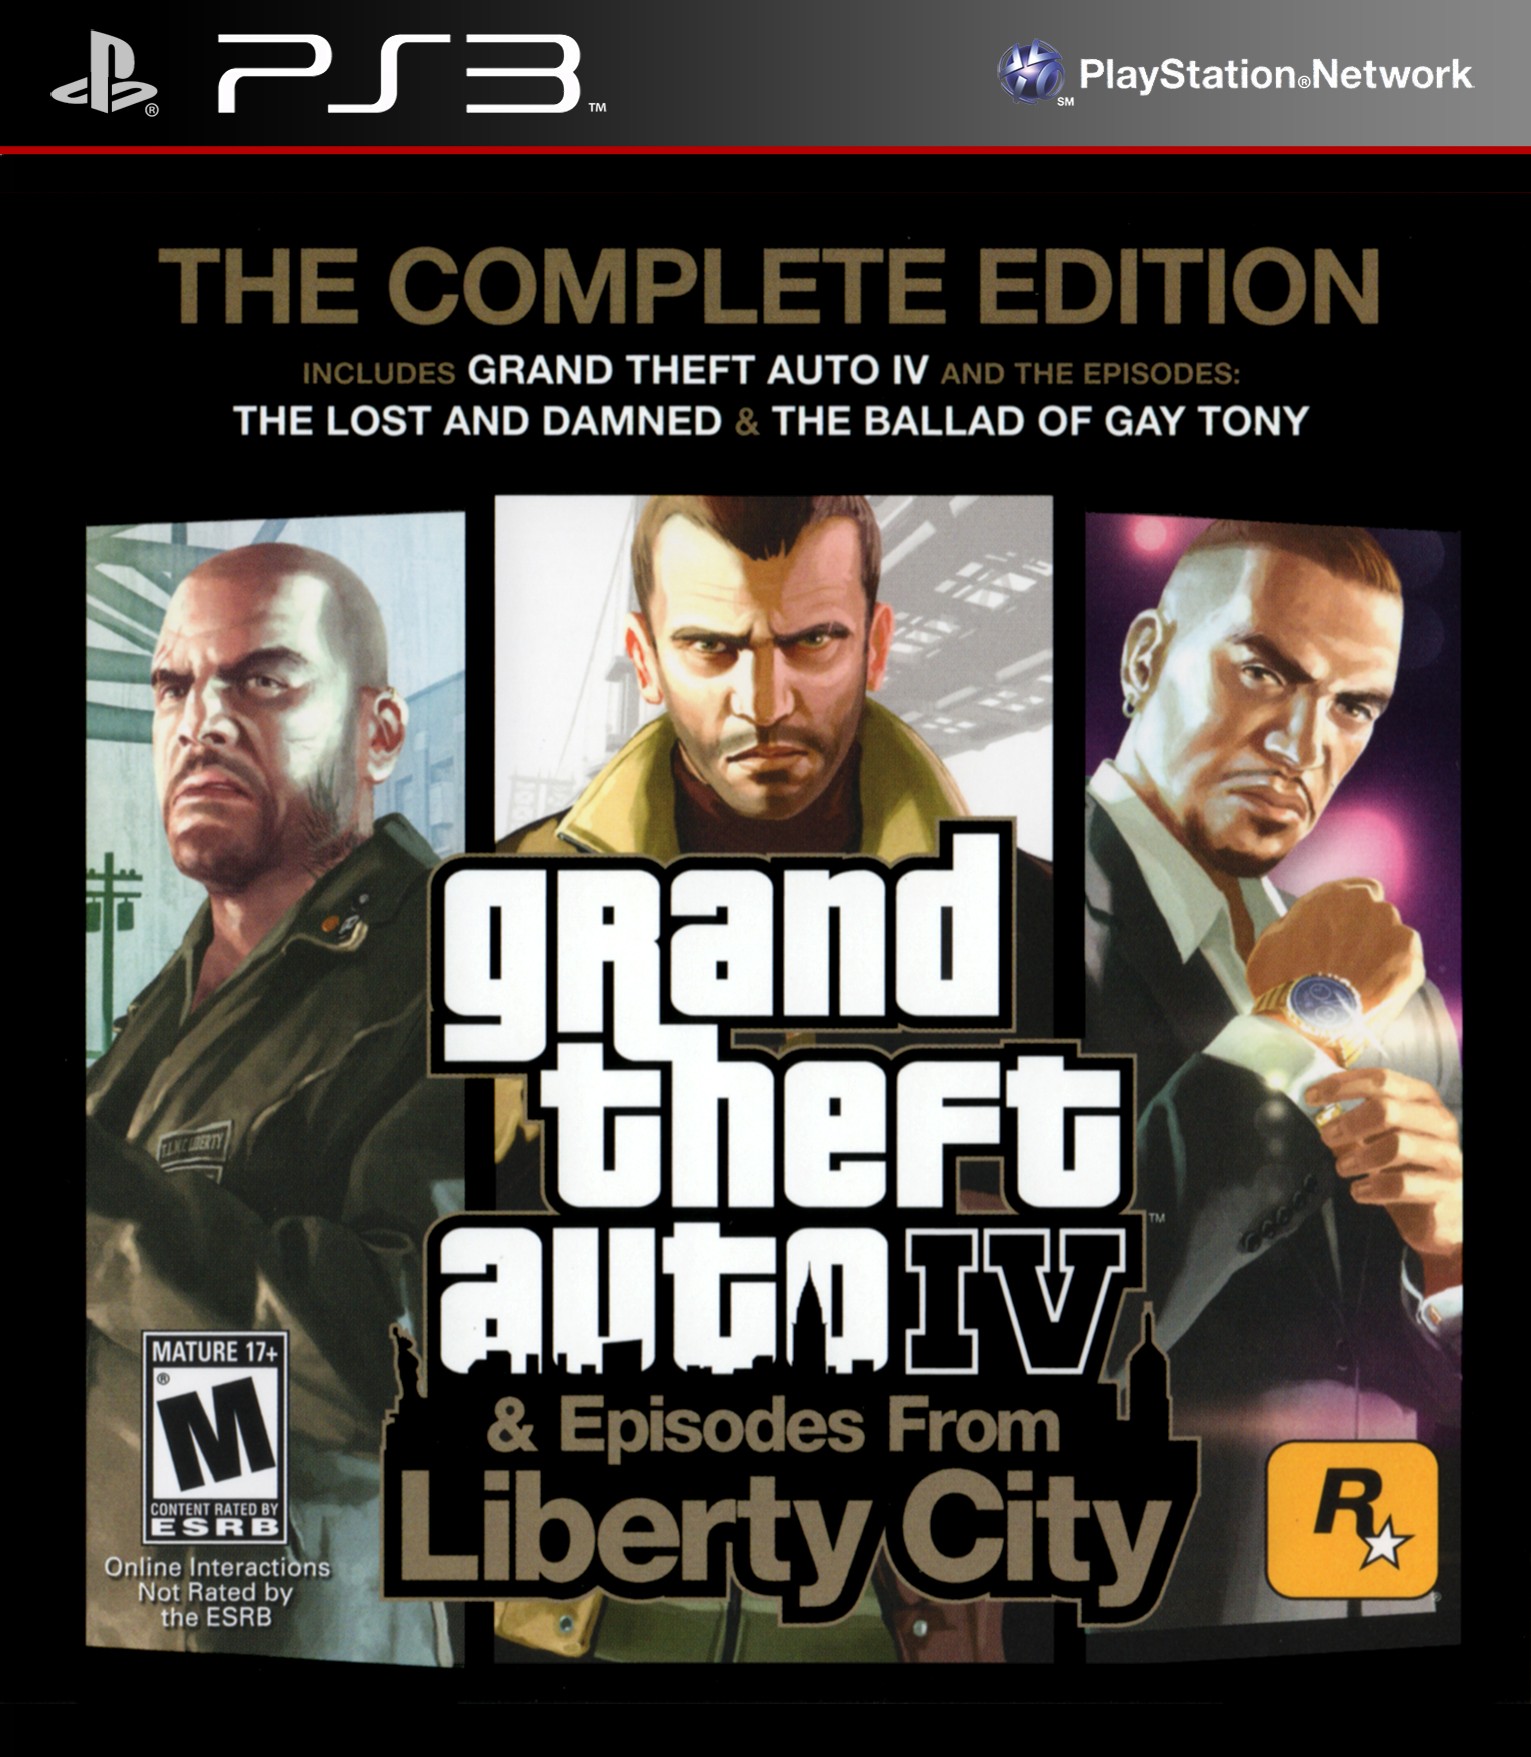 'Grand Theft Auto: IV and episodes from Liberty City'